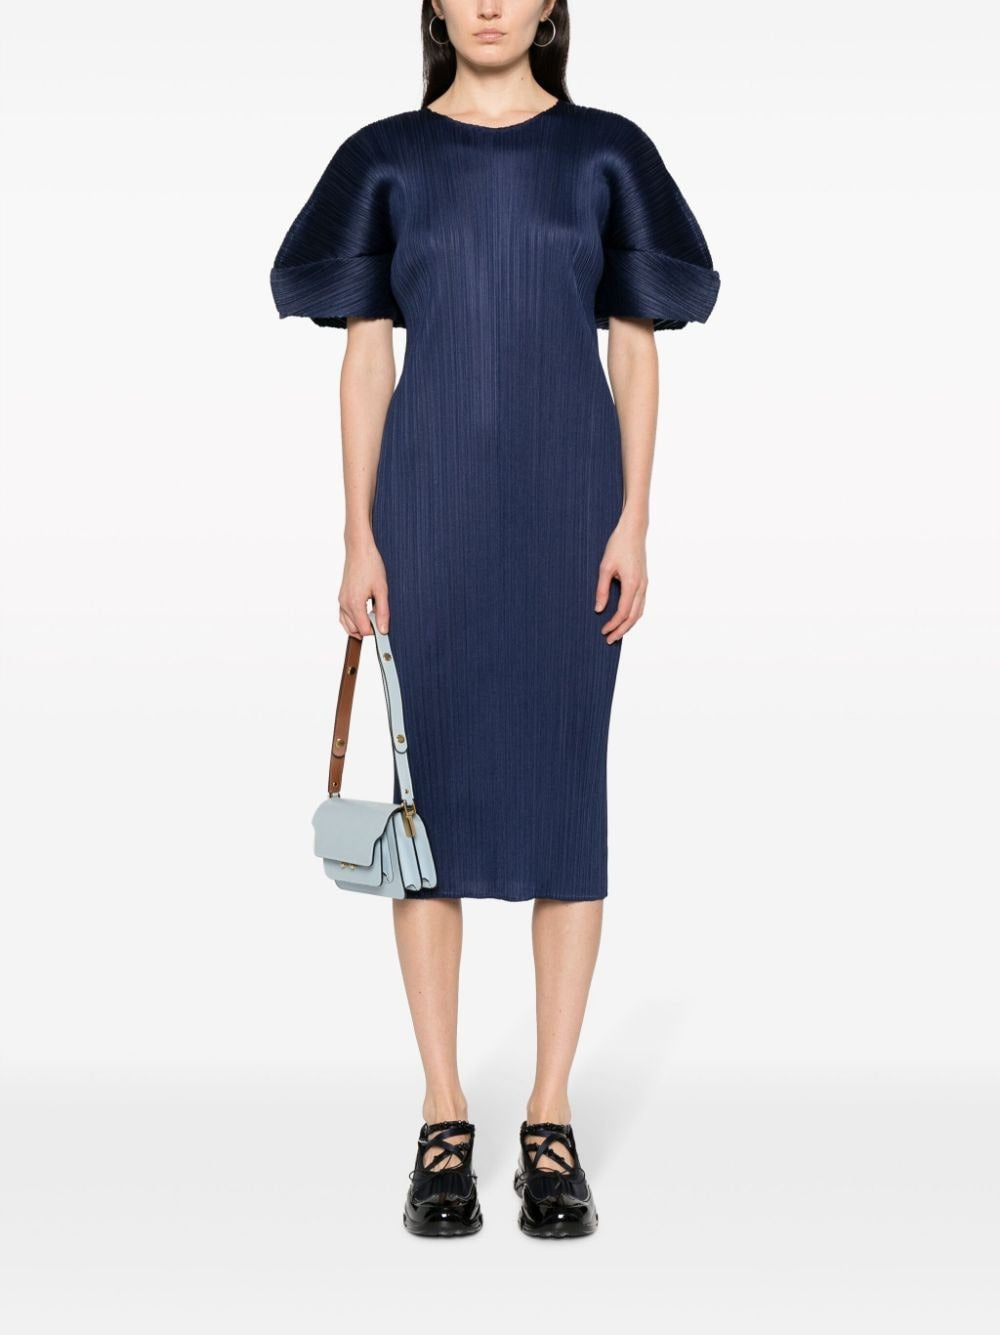 PLEATS PLEASE ISSEY MIYAKE-MONTHLY COLORS : AUGUST-PP38JH127 78